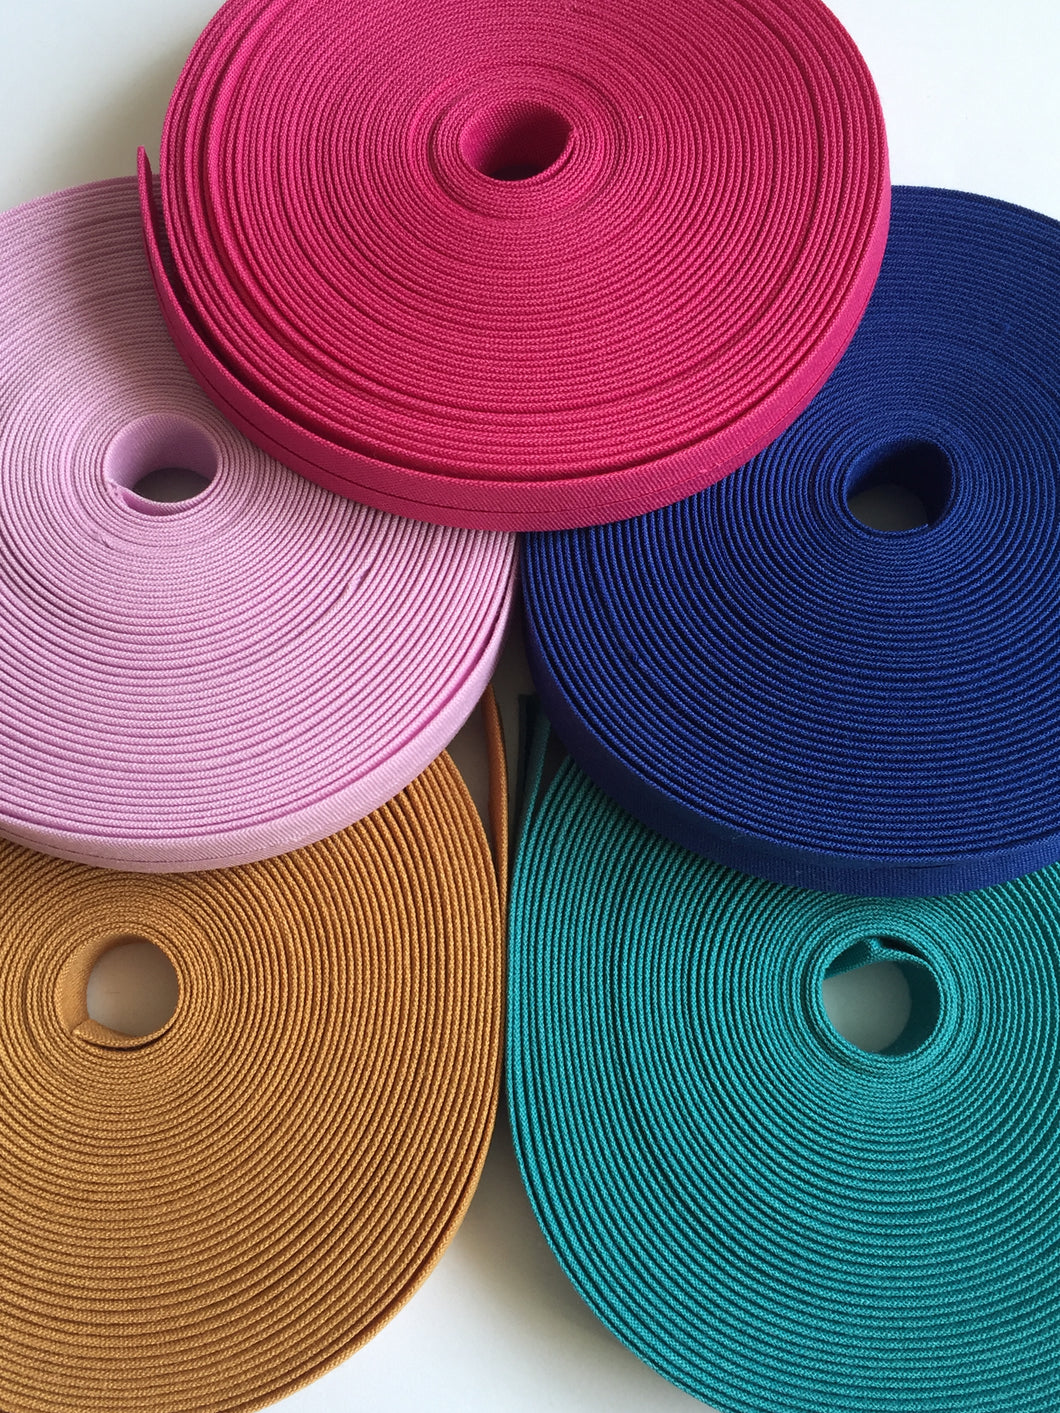 FULL ROLL Lovely Bias Binding 13mm Wide Double Folded 7 metres Tape Trim Trimmings Different Colours To Choose From